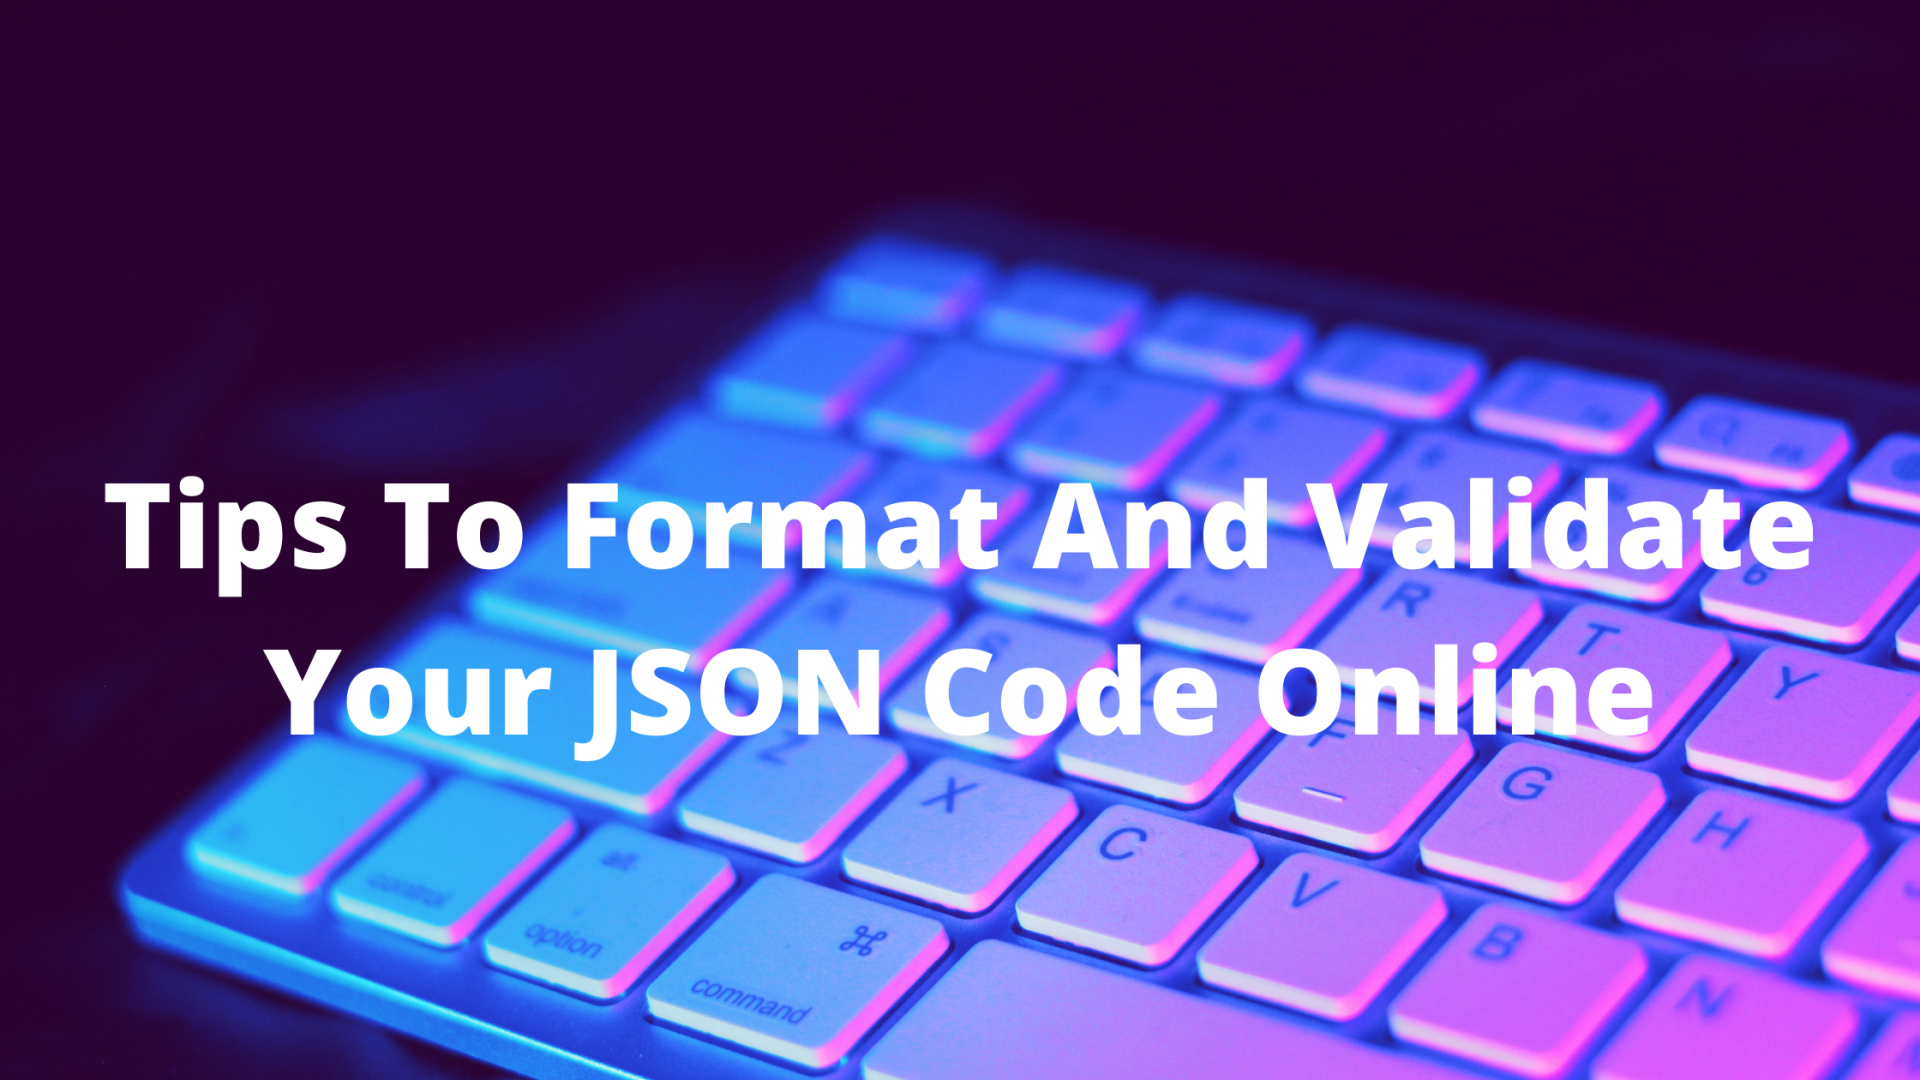 Tips To Format And Validate Your JSON Code Online